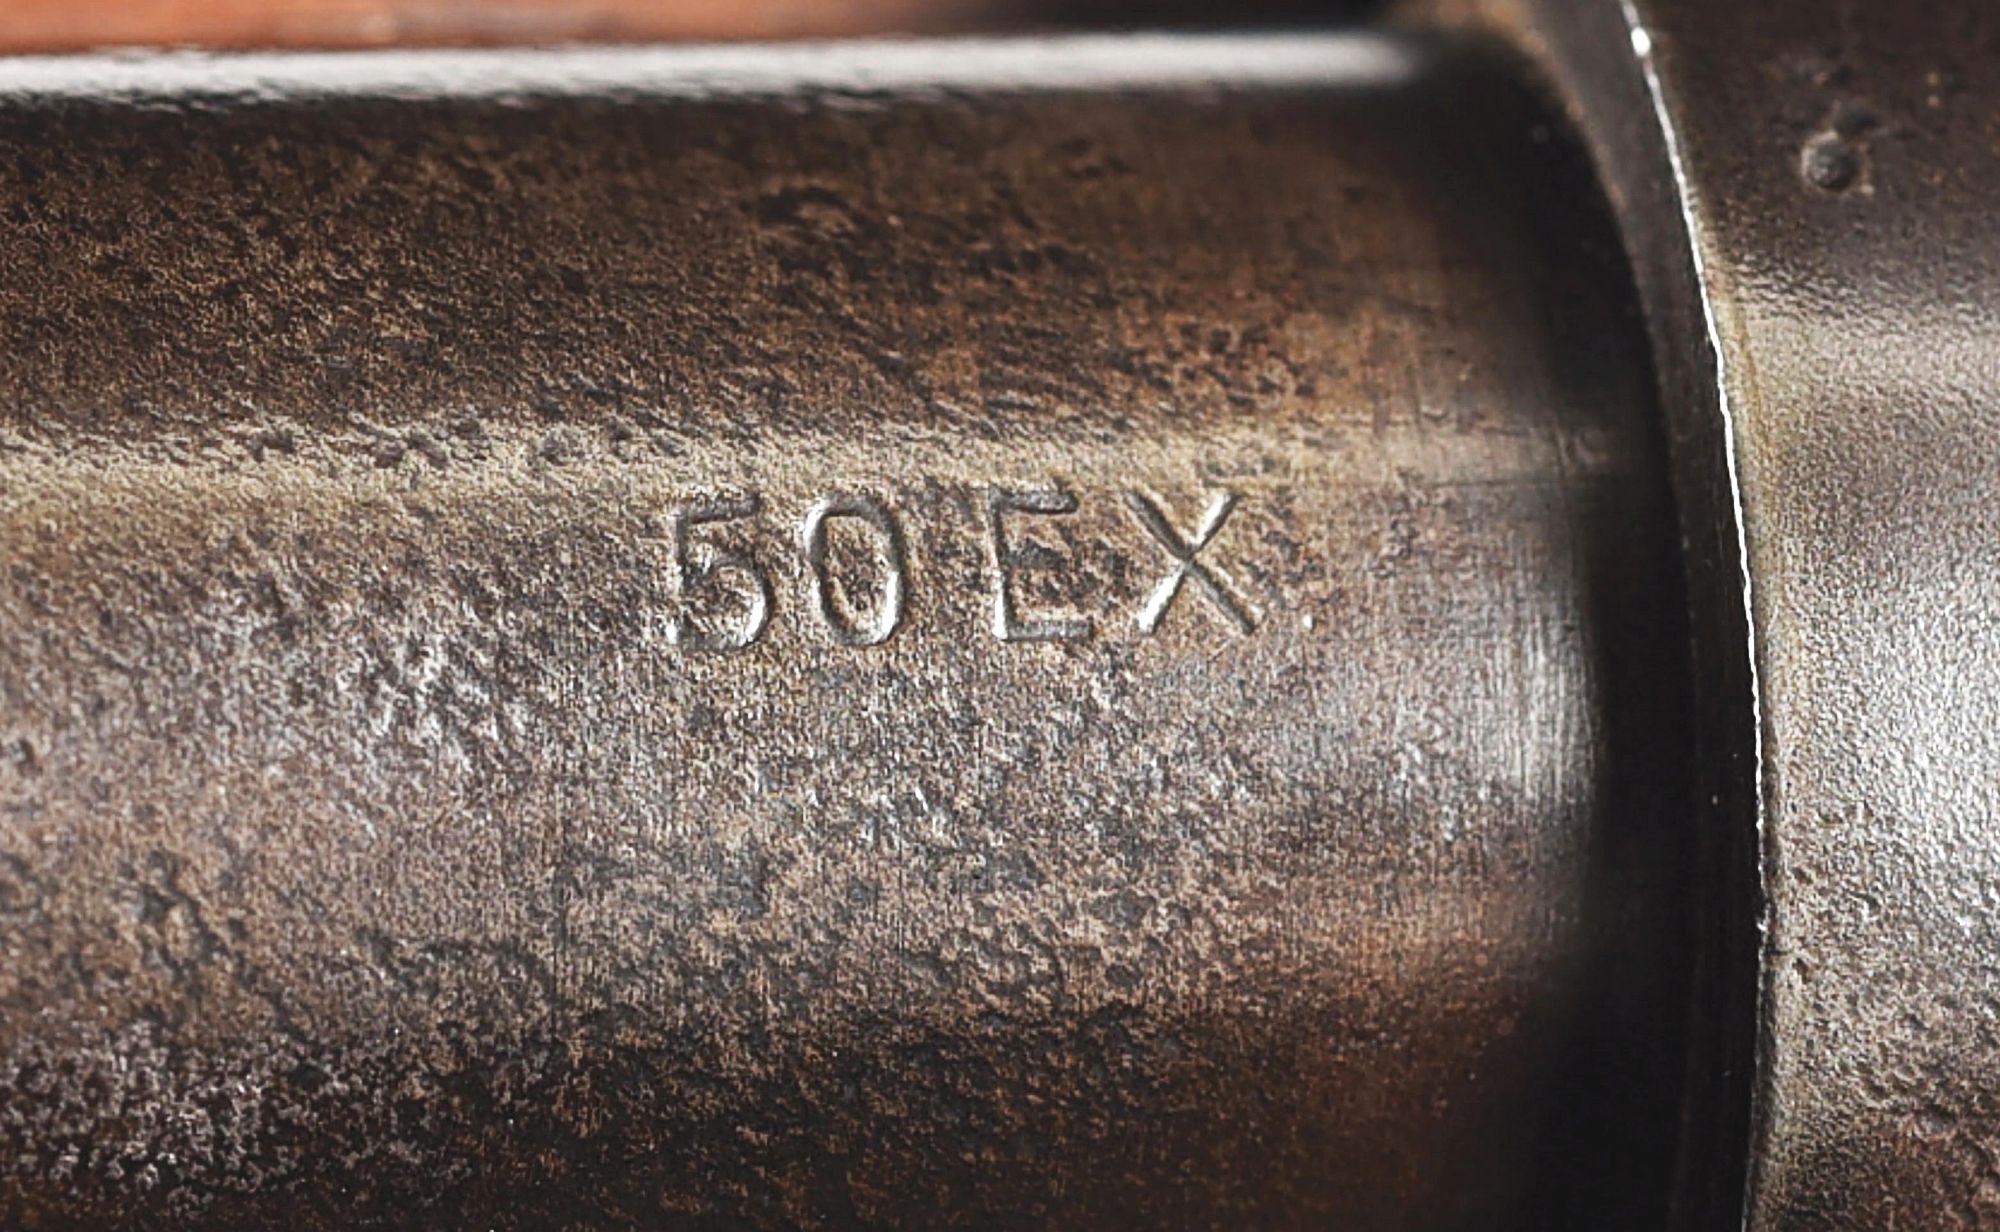 (A) BIG BORE .50 EXPRESS WINCHESTER MODEL 1886 LEVER ACTION RIFLE.